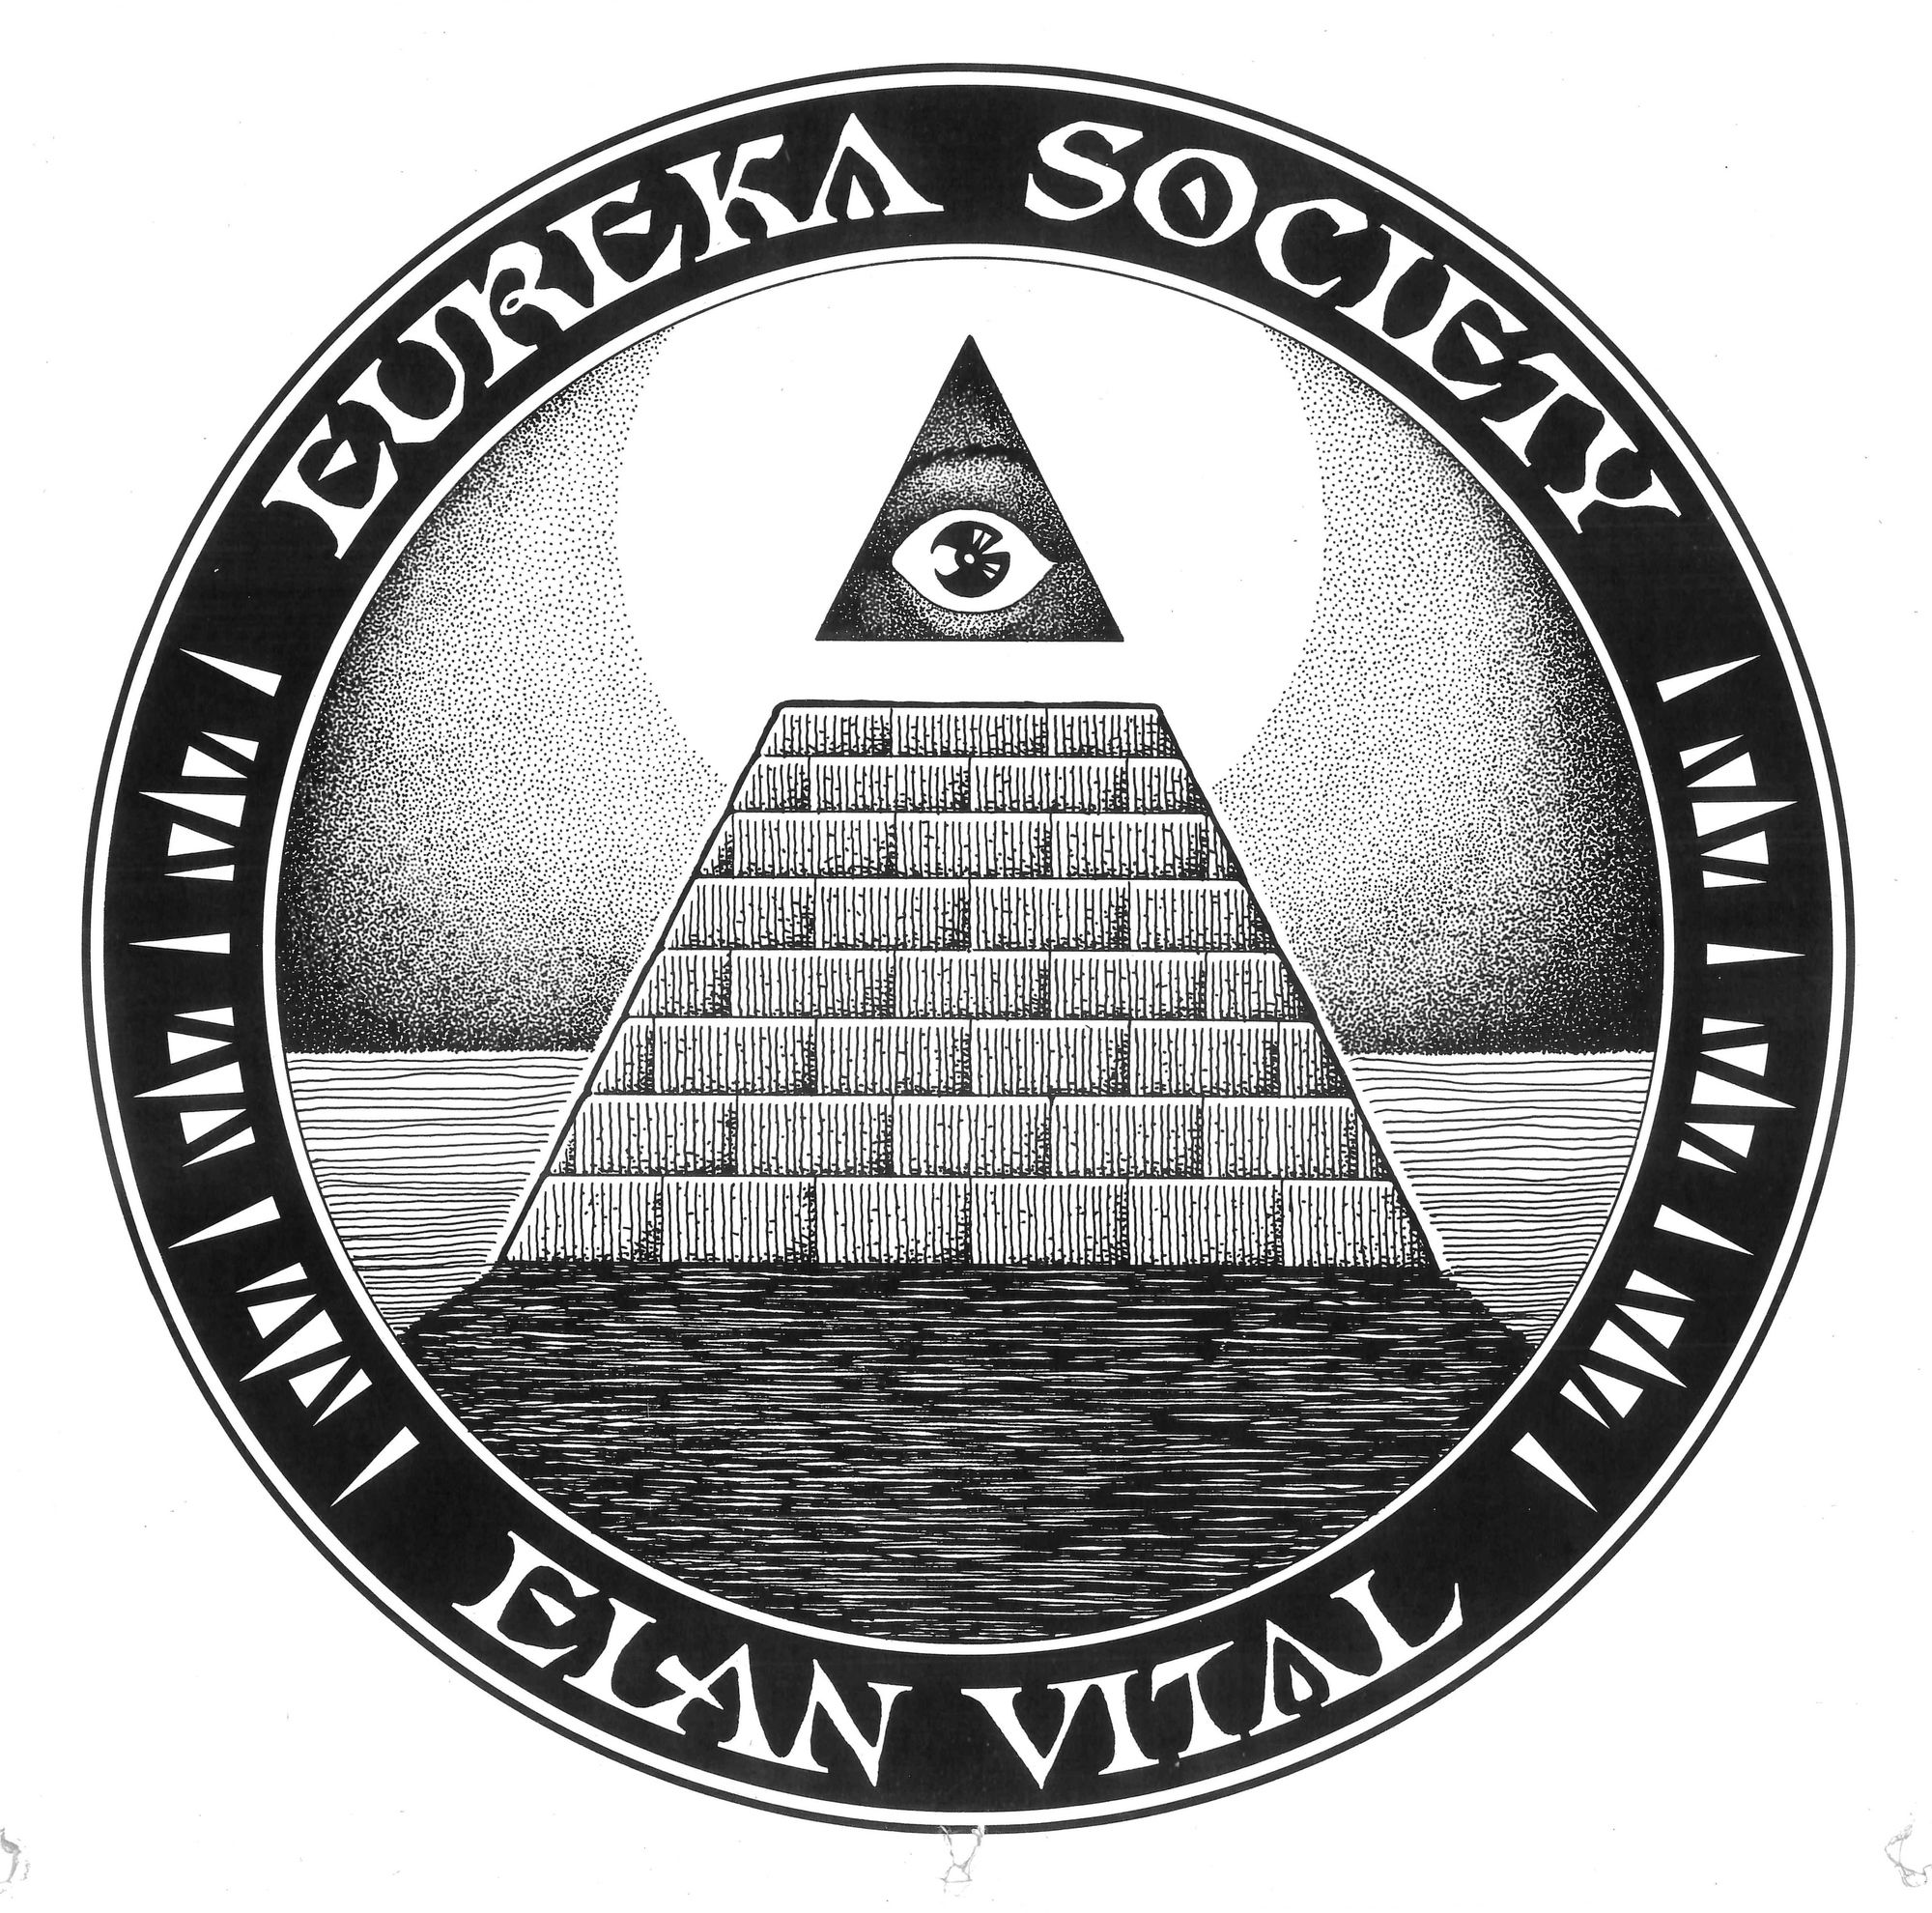 Hand-drawn and lettered roundel for the Eureka Society.